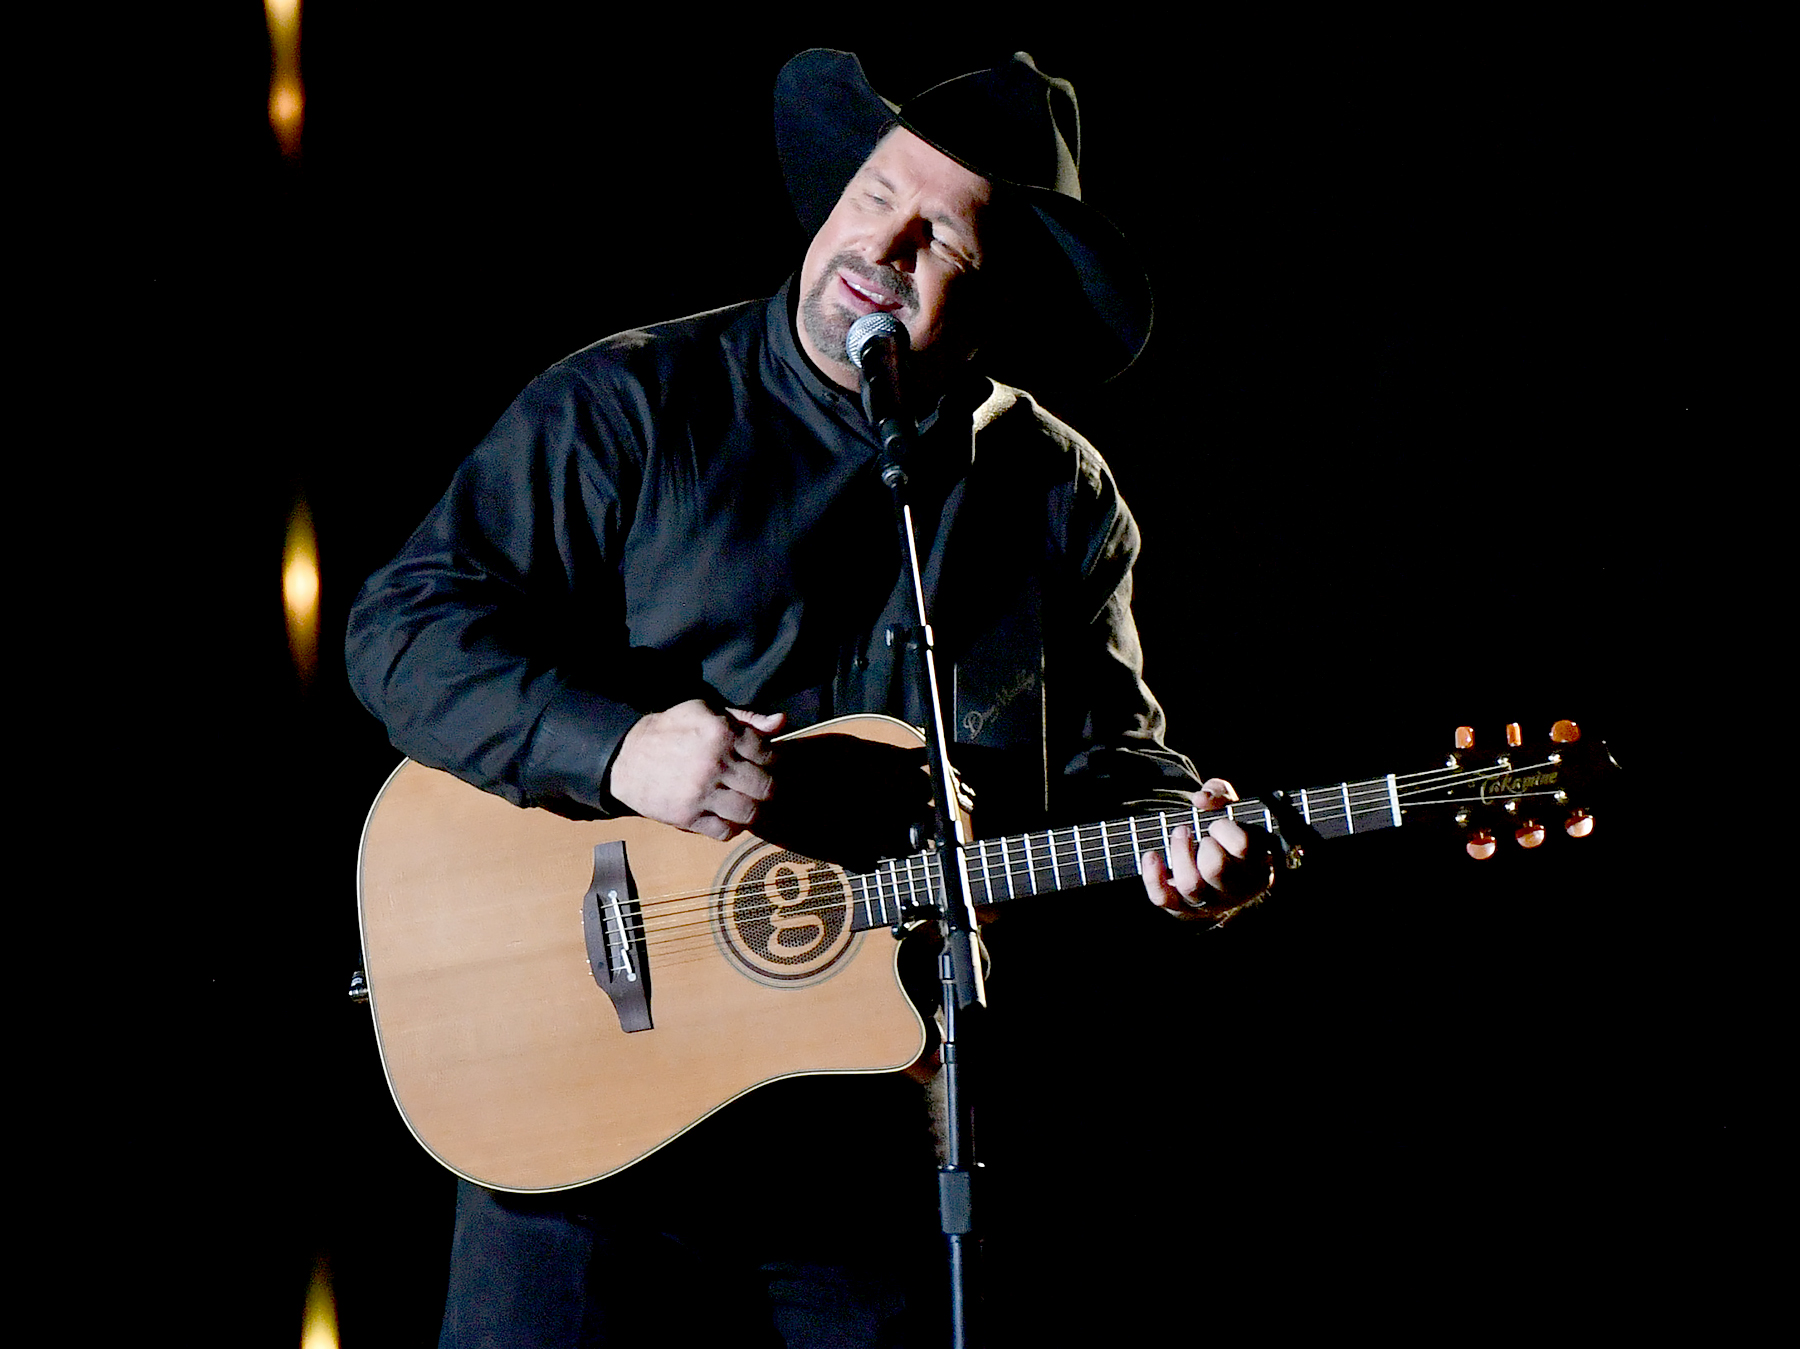 garth brooks song about older woman